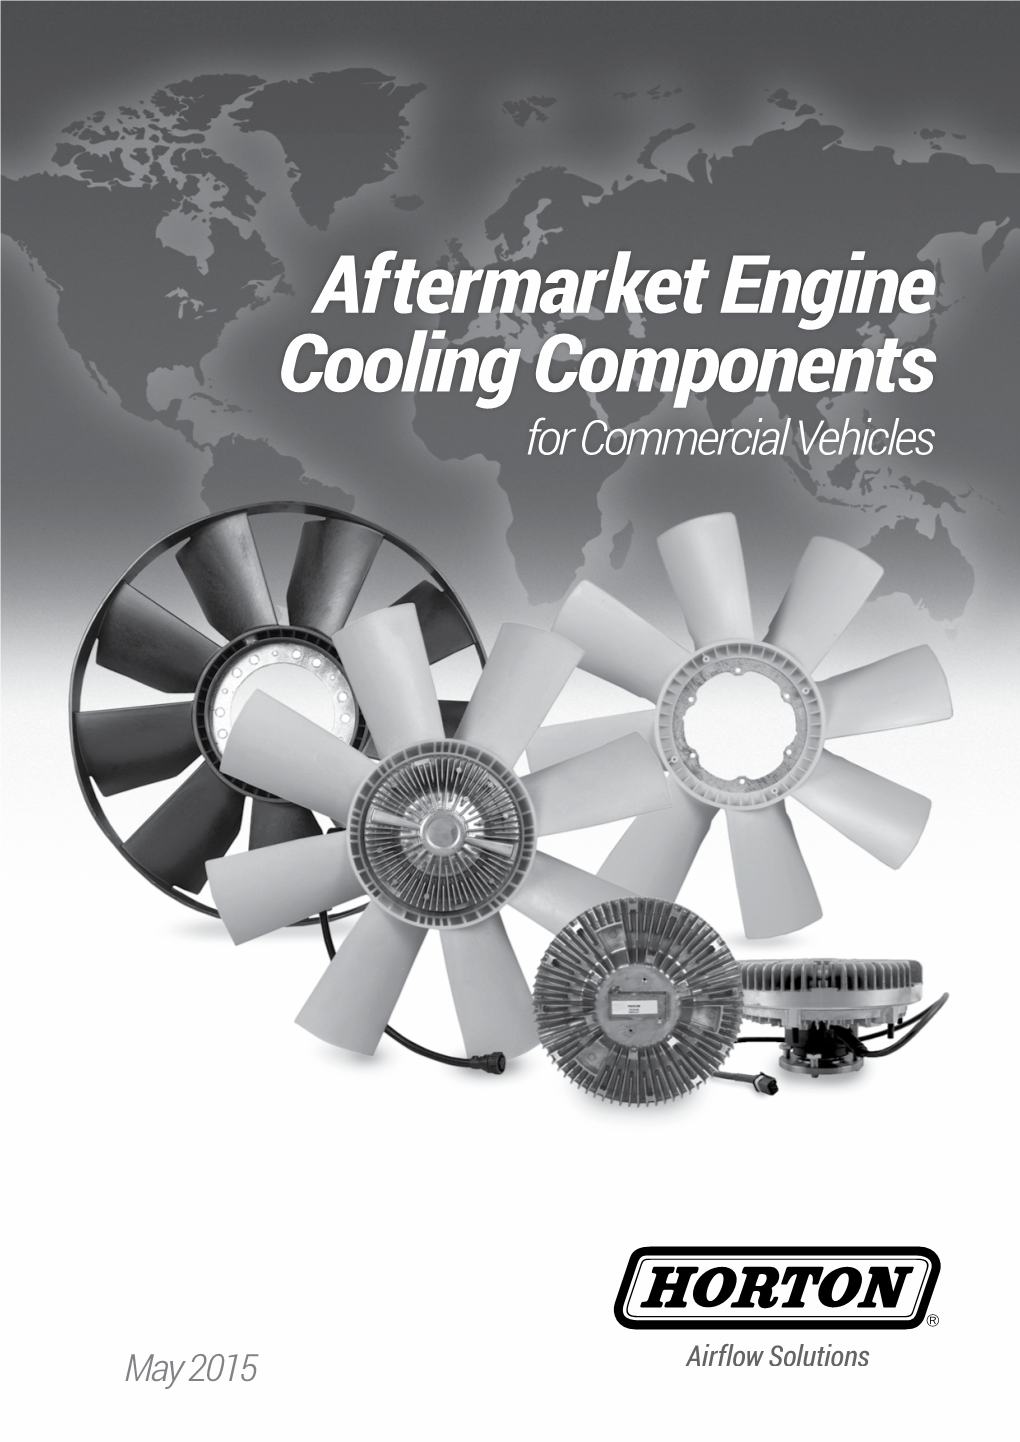 Aftermarket Engine Cooling Components for Commercial Vehicles